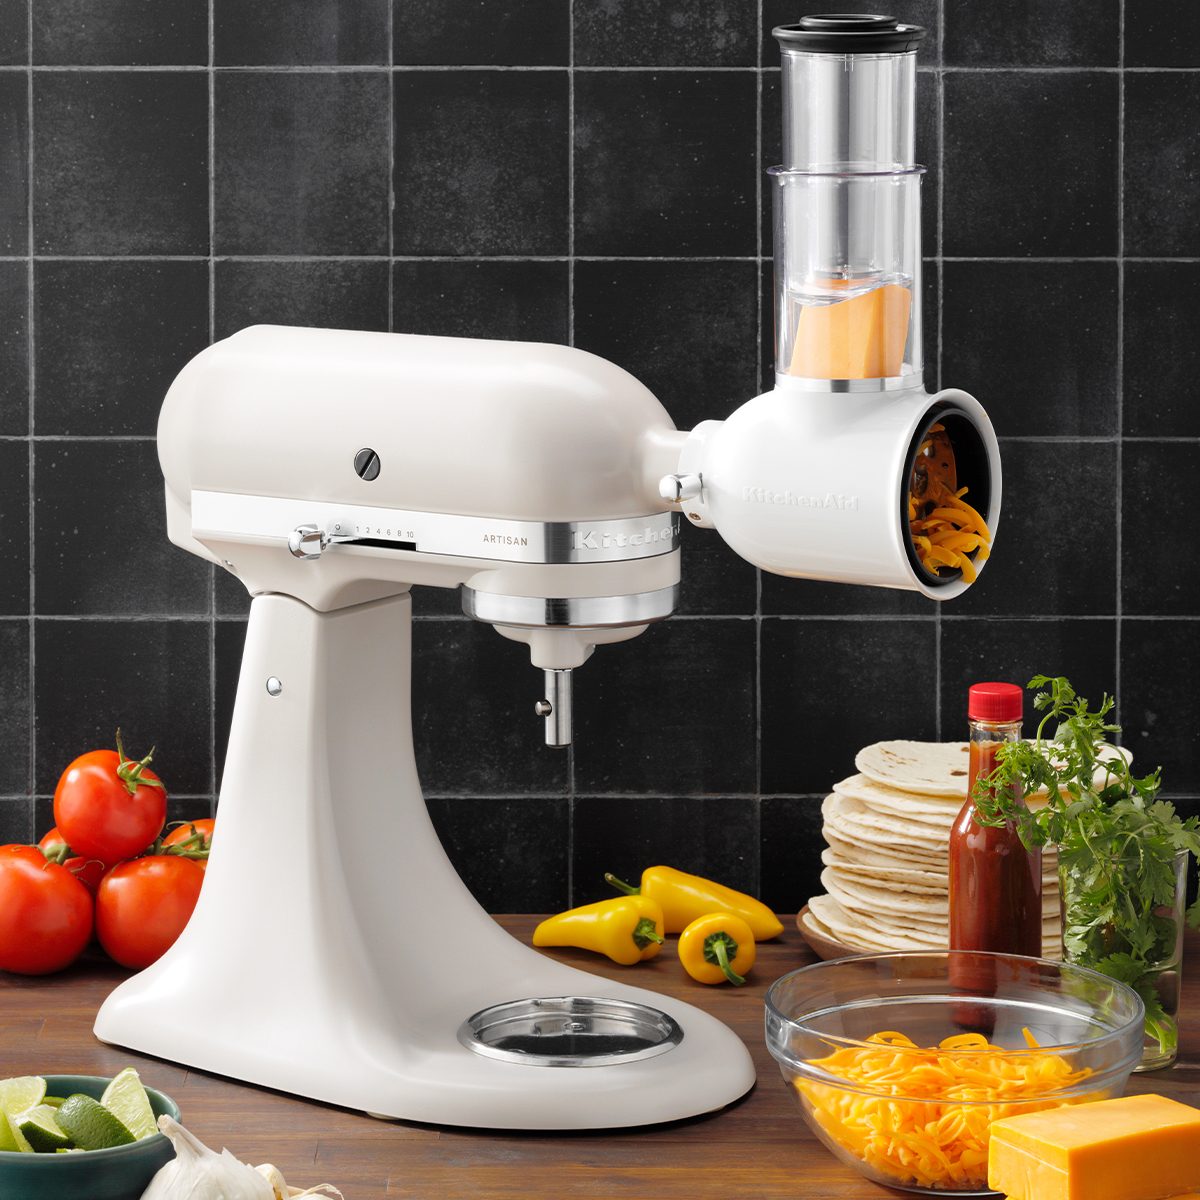 KitchenAid Spiralizer Review: Helps You Eat Creatively